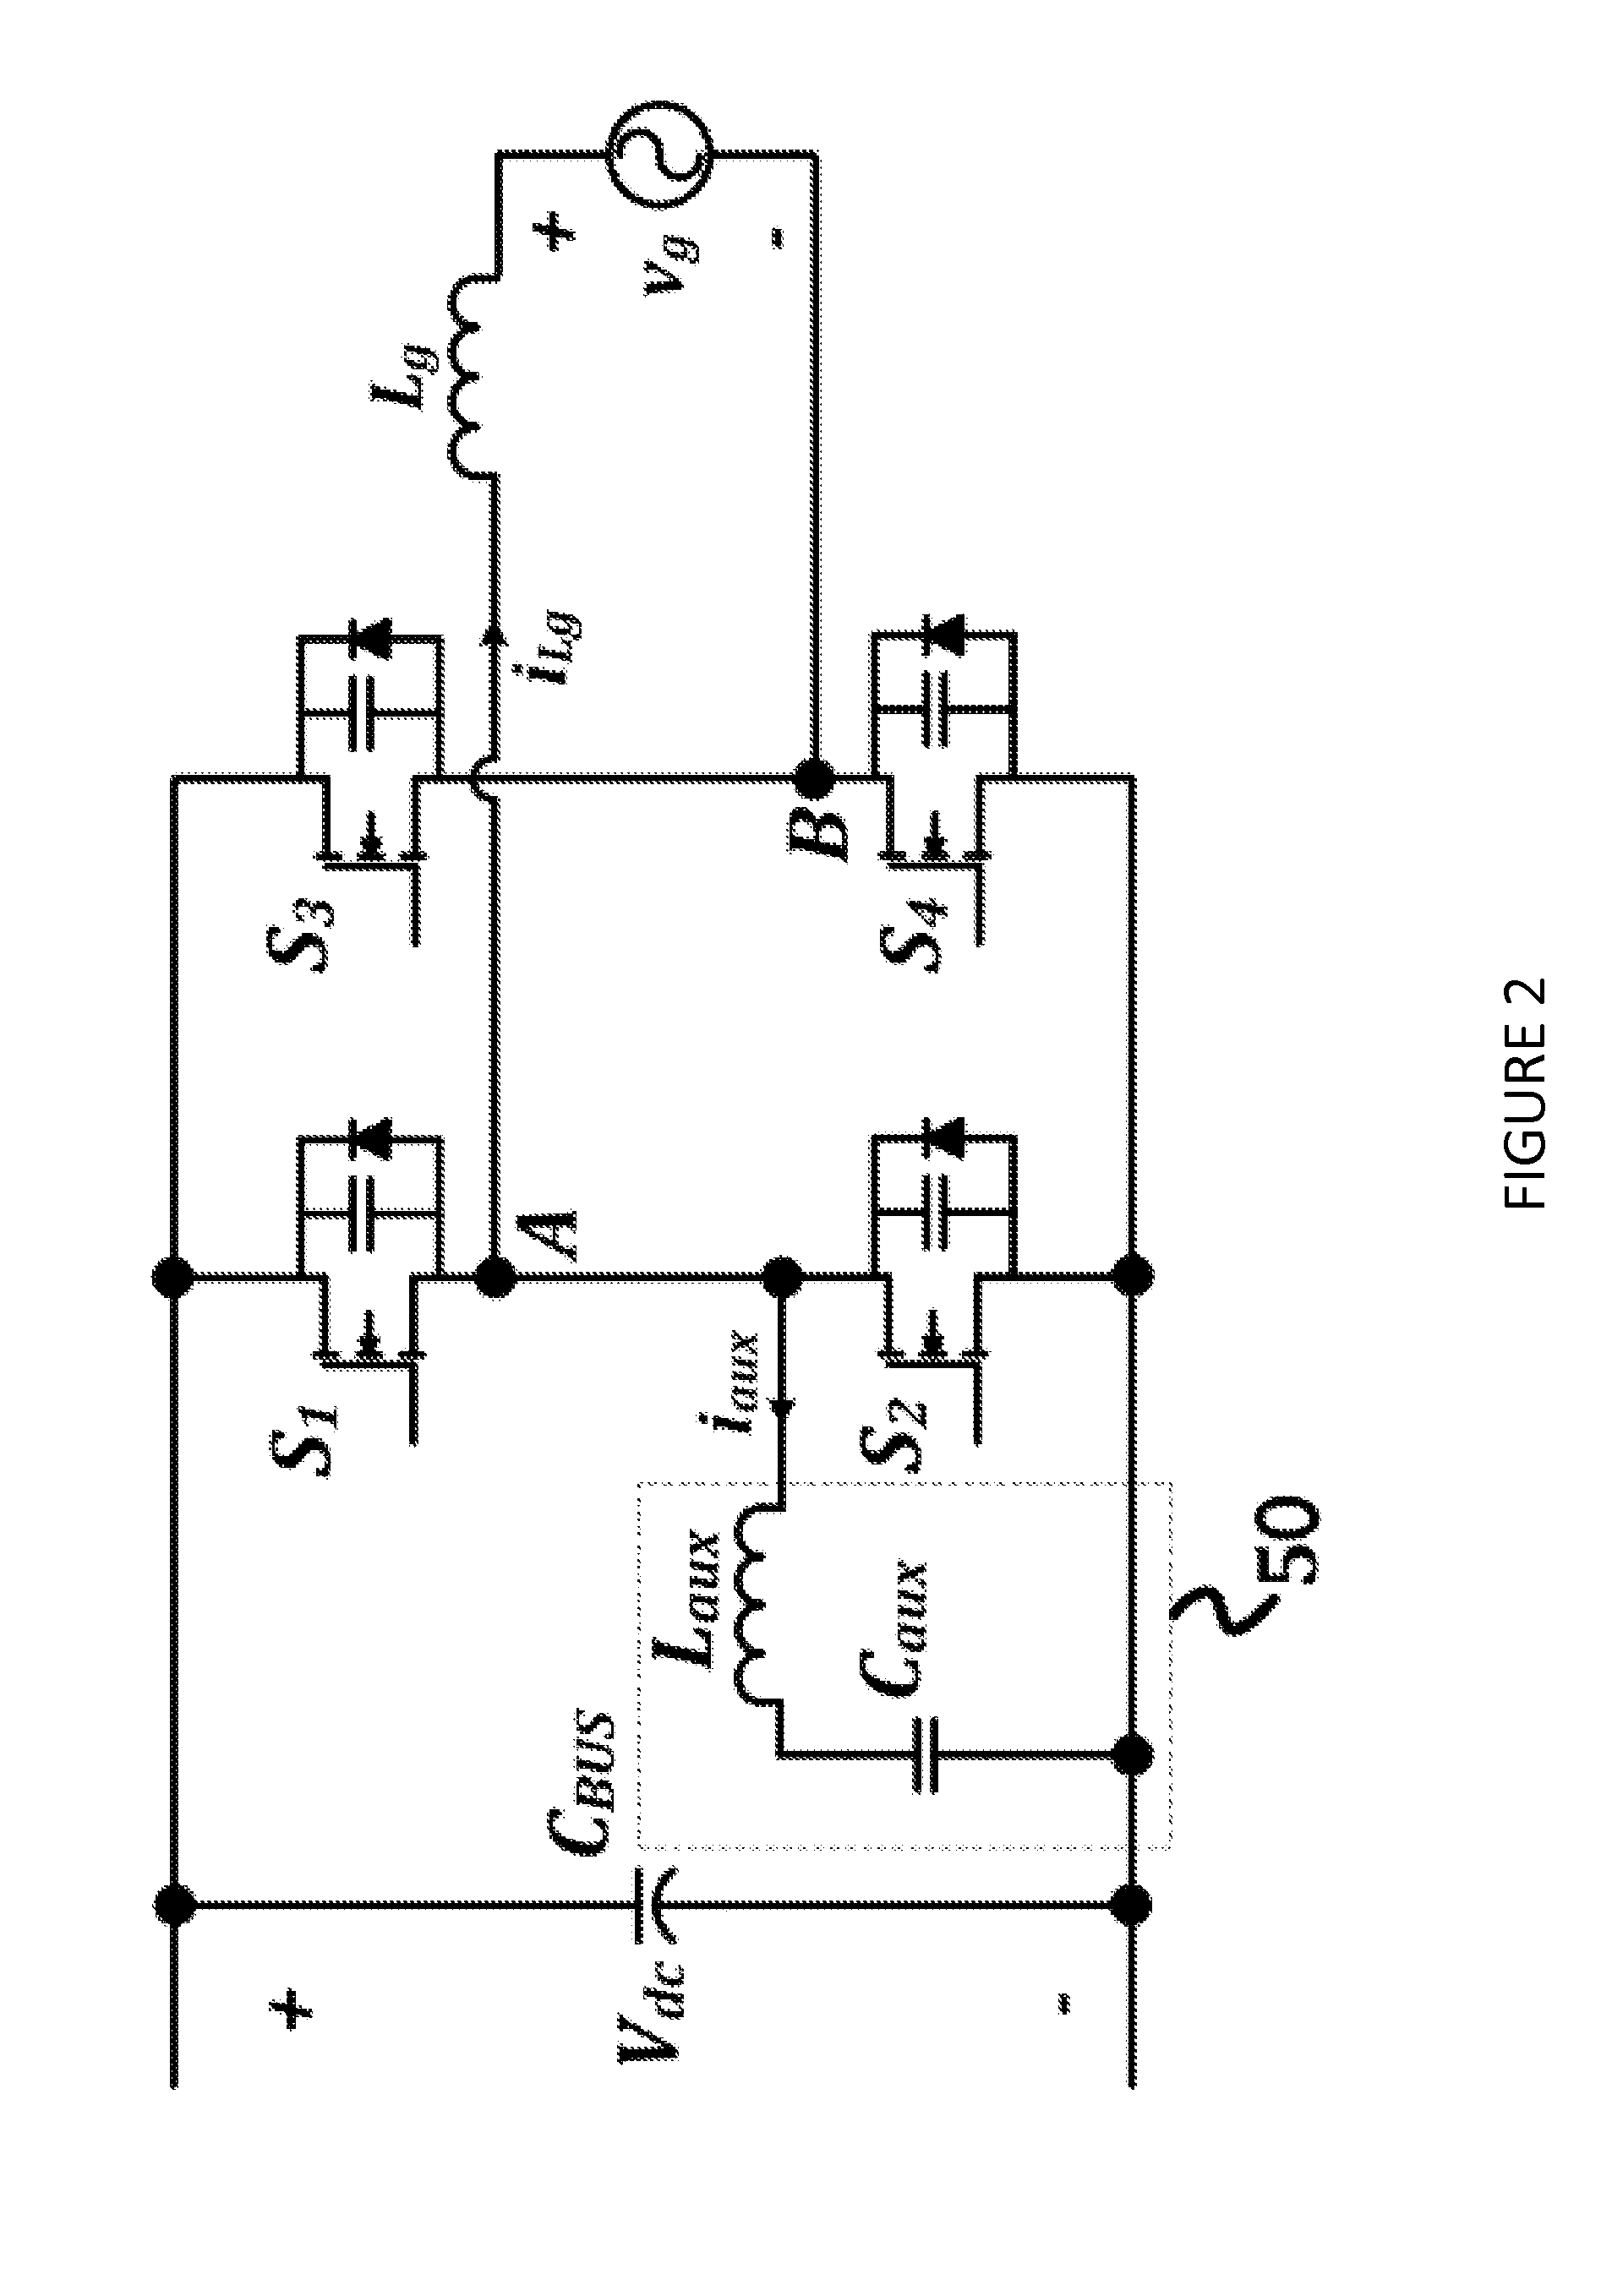 Zvs voltage source inverter with reduced output current ripple